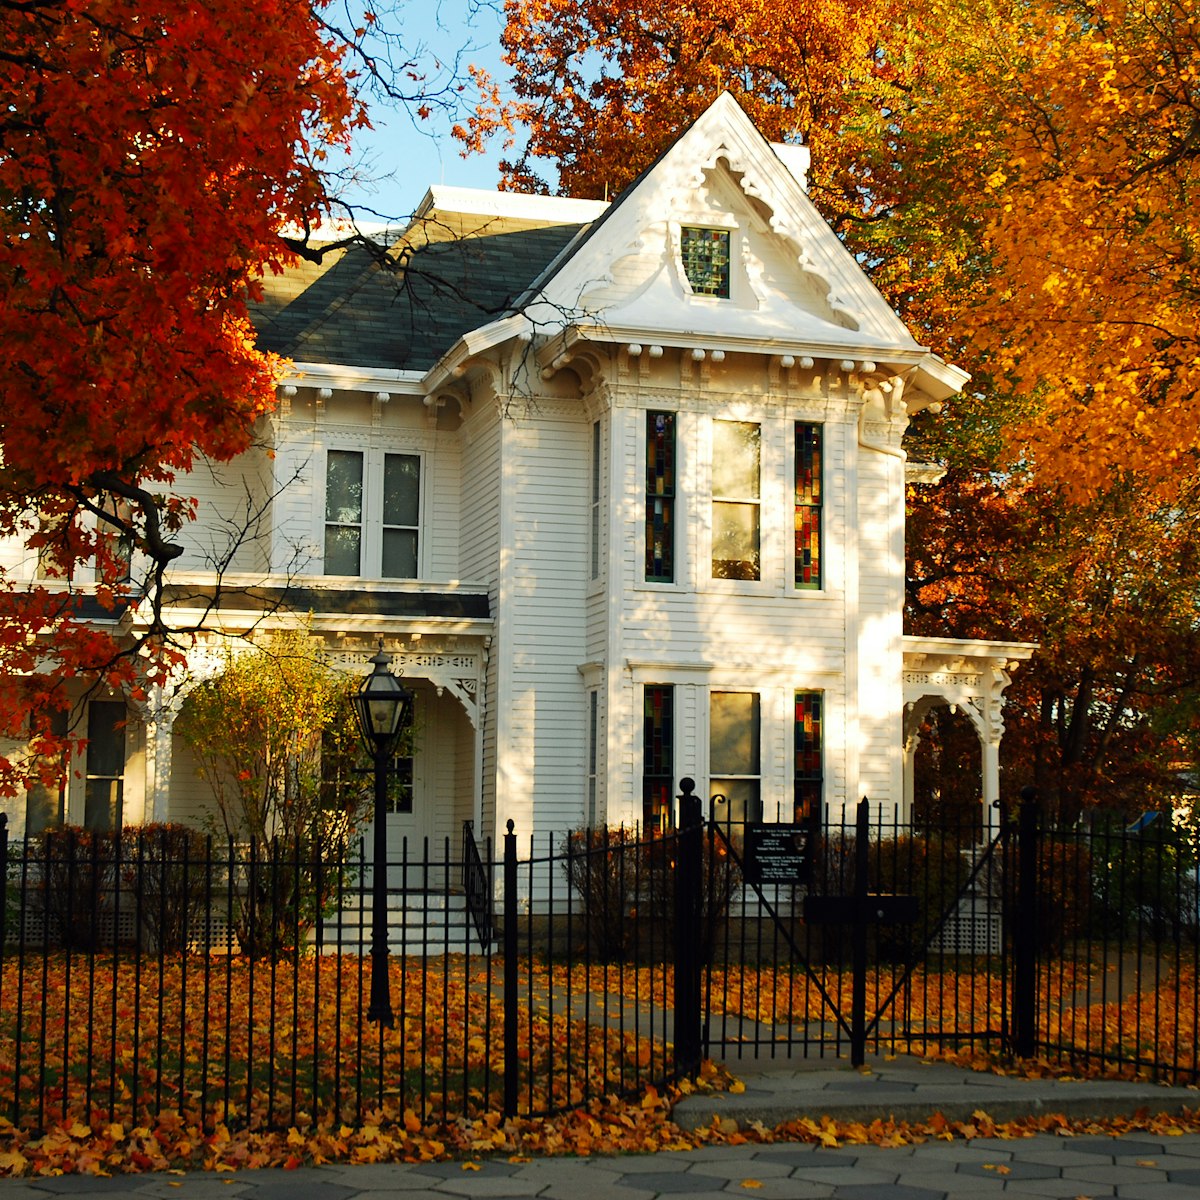 Fall colors surround the former home of US President Harry Truman in Independence, Missouri.